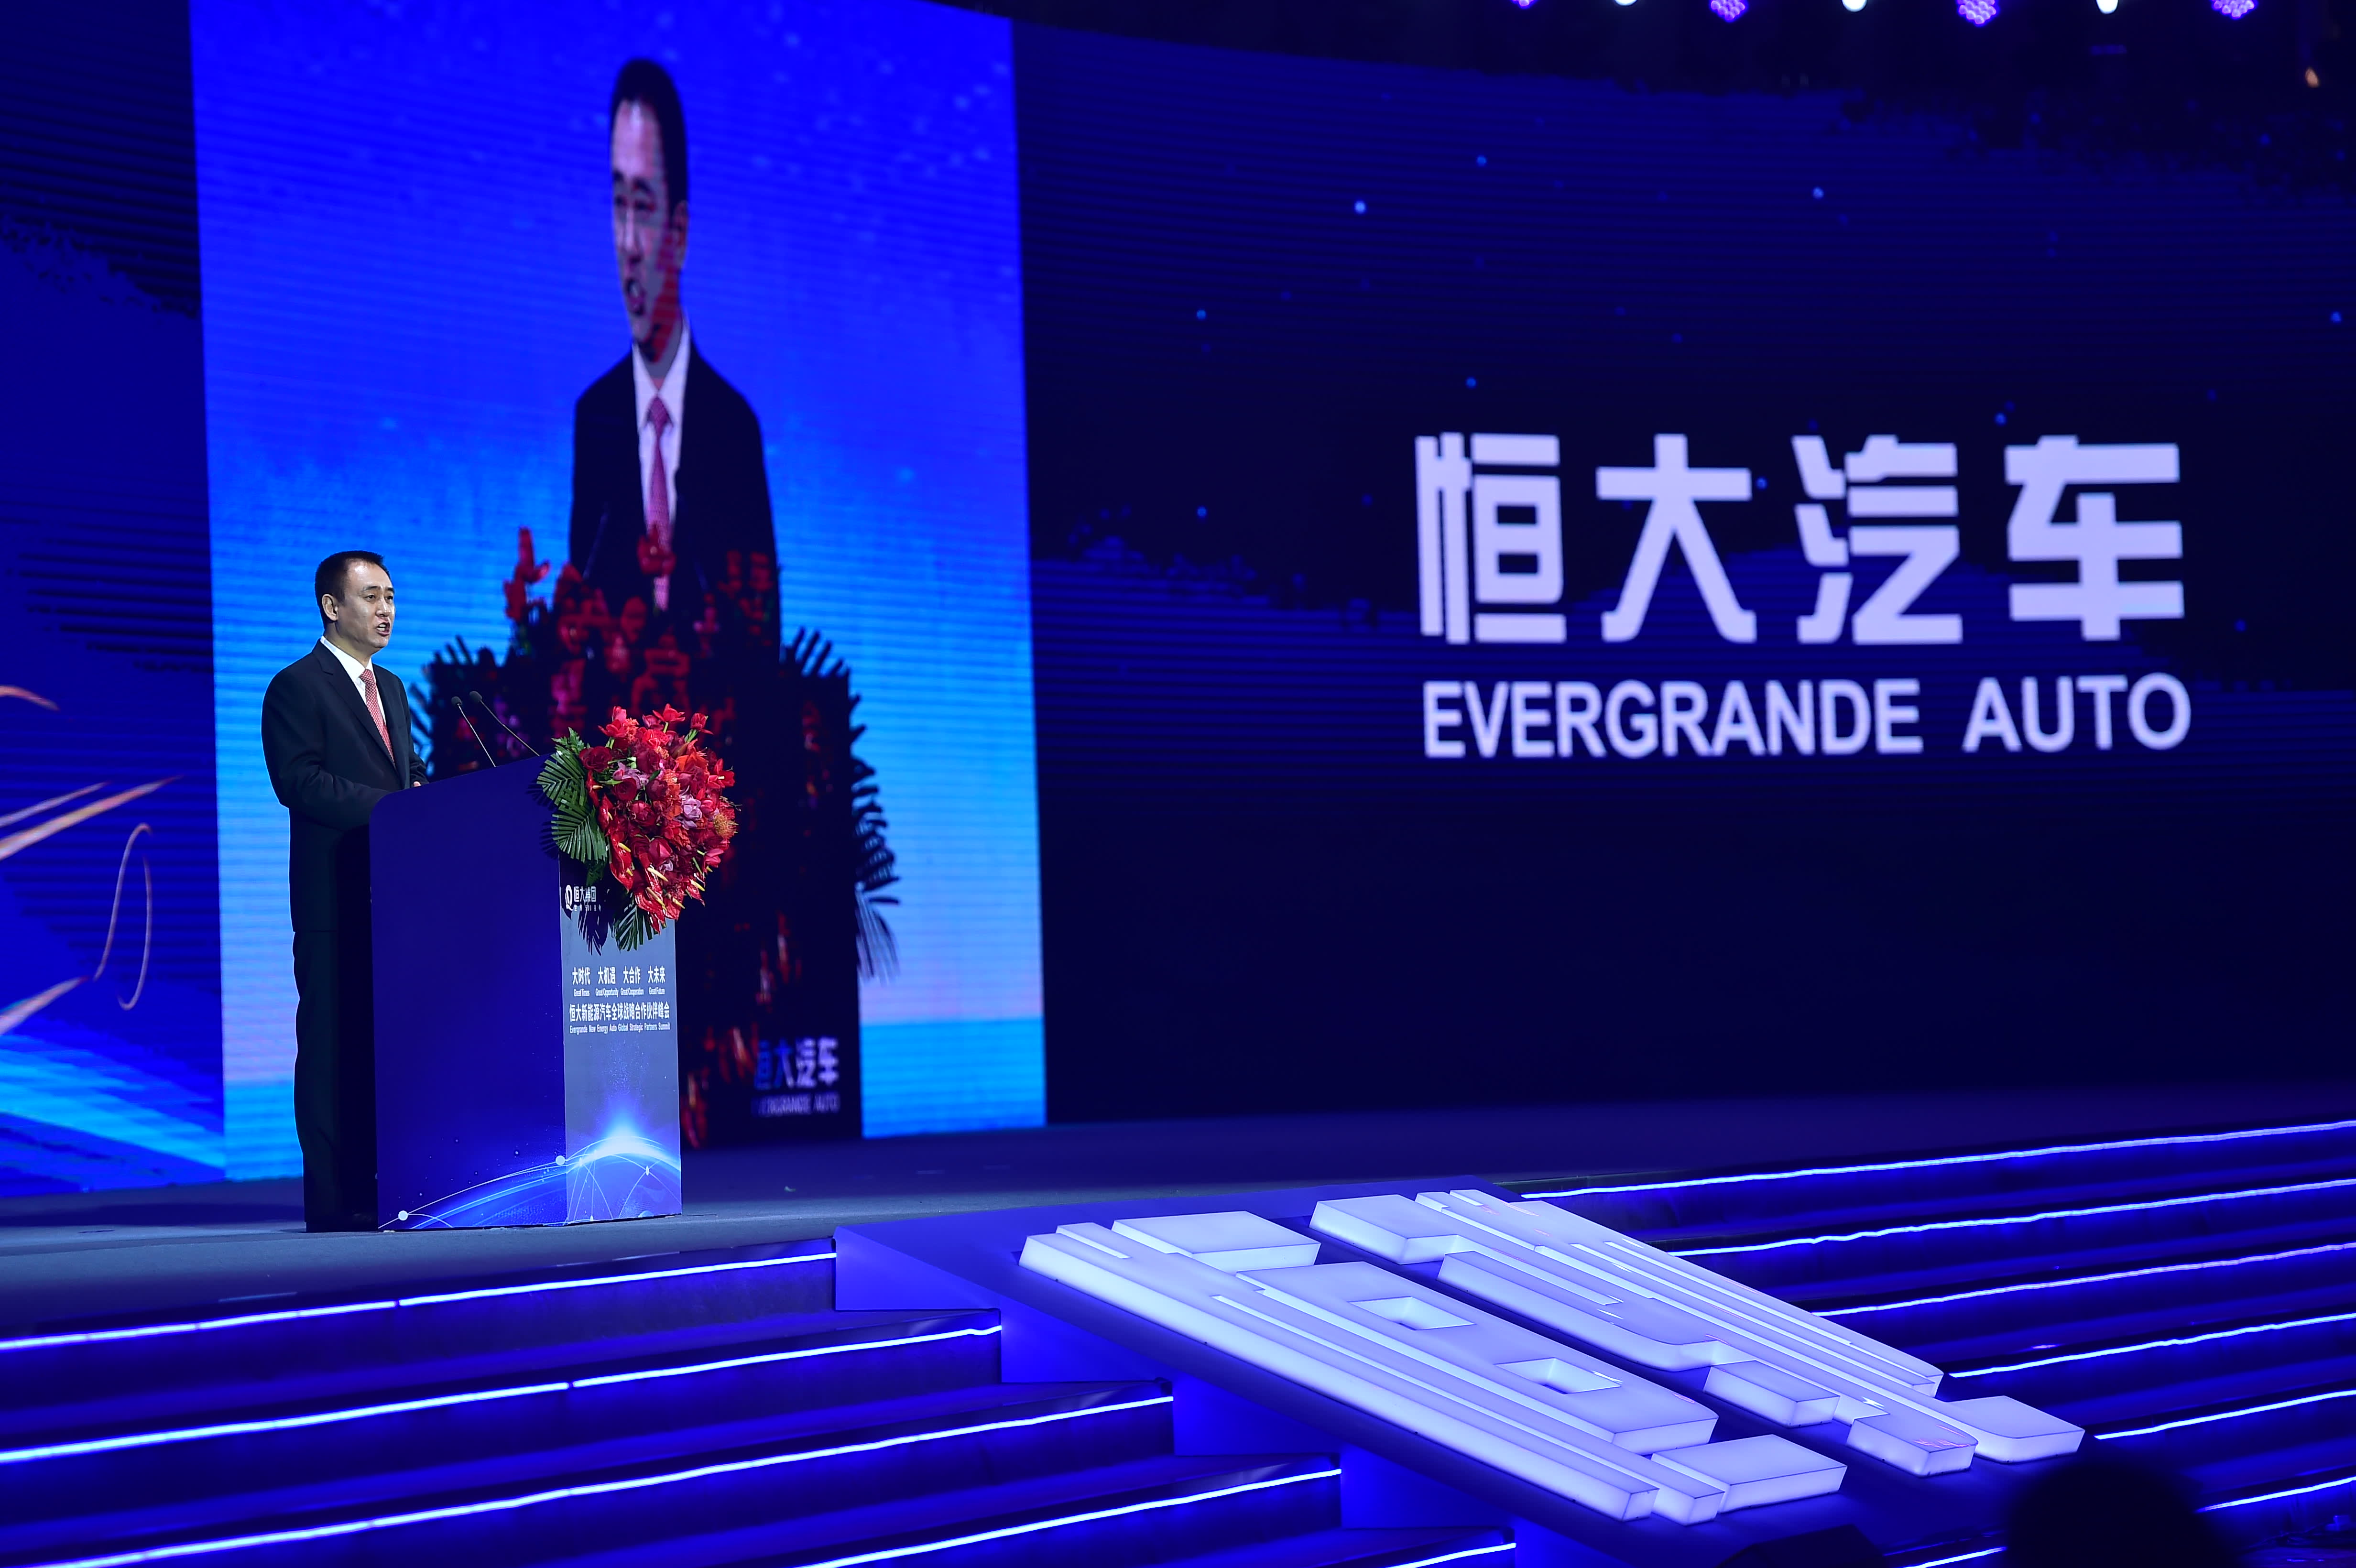 Evergrande electric car unit gets financing to compete with Tesla, Nio in China